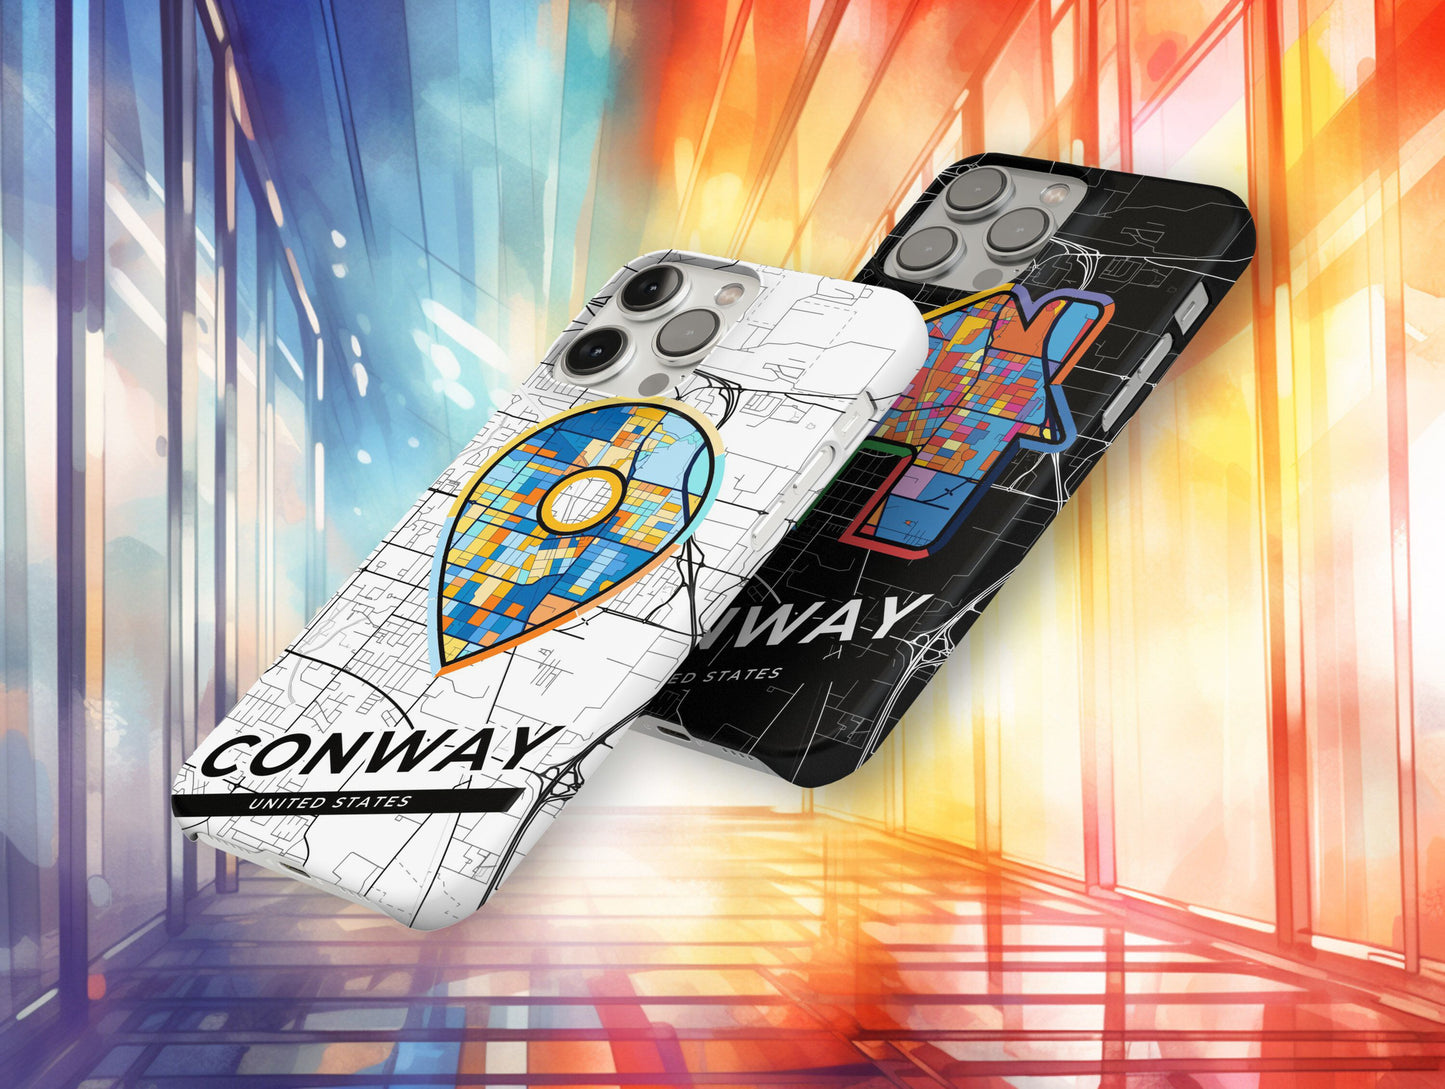 Conway Arkansas slim phone case with colorful icon. Birthday, wedding or housewarming gift. Couple match cases.